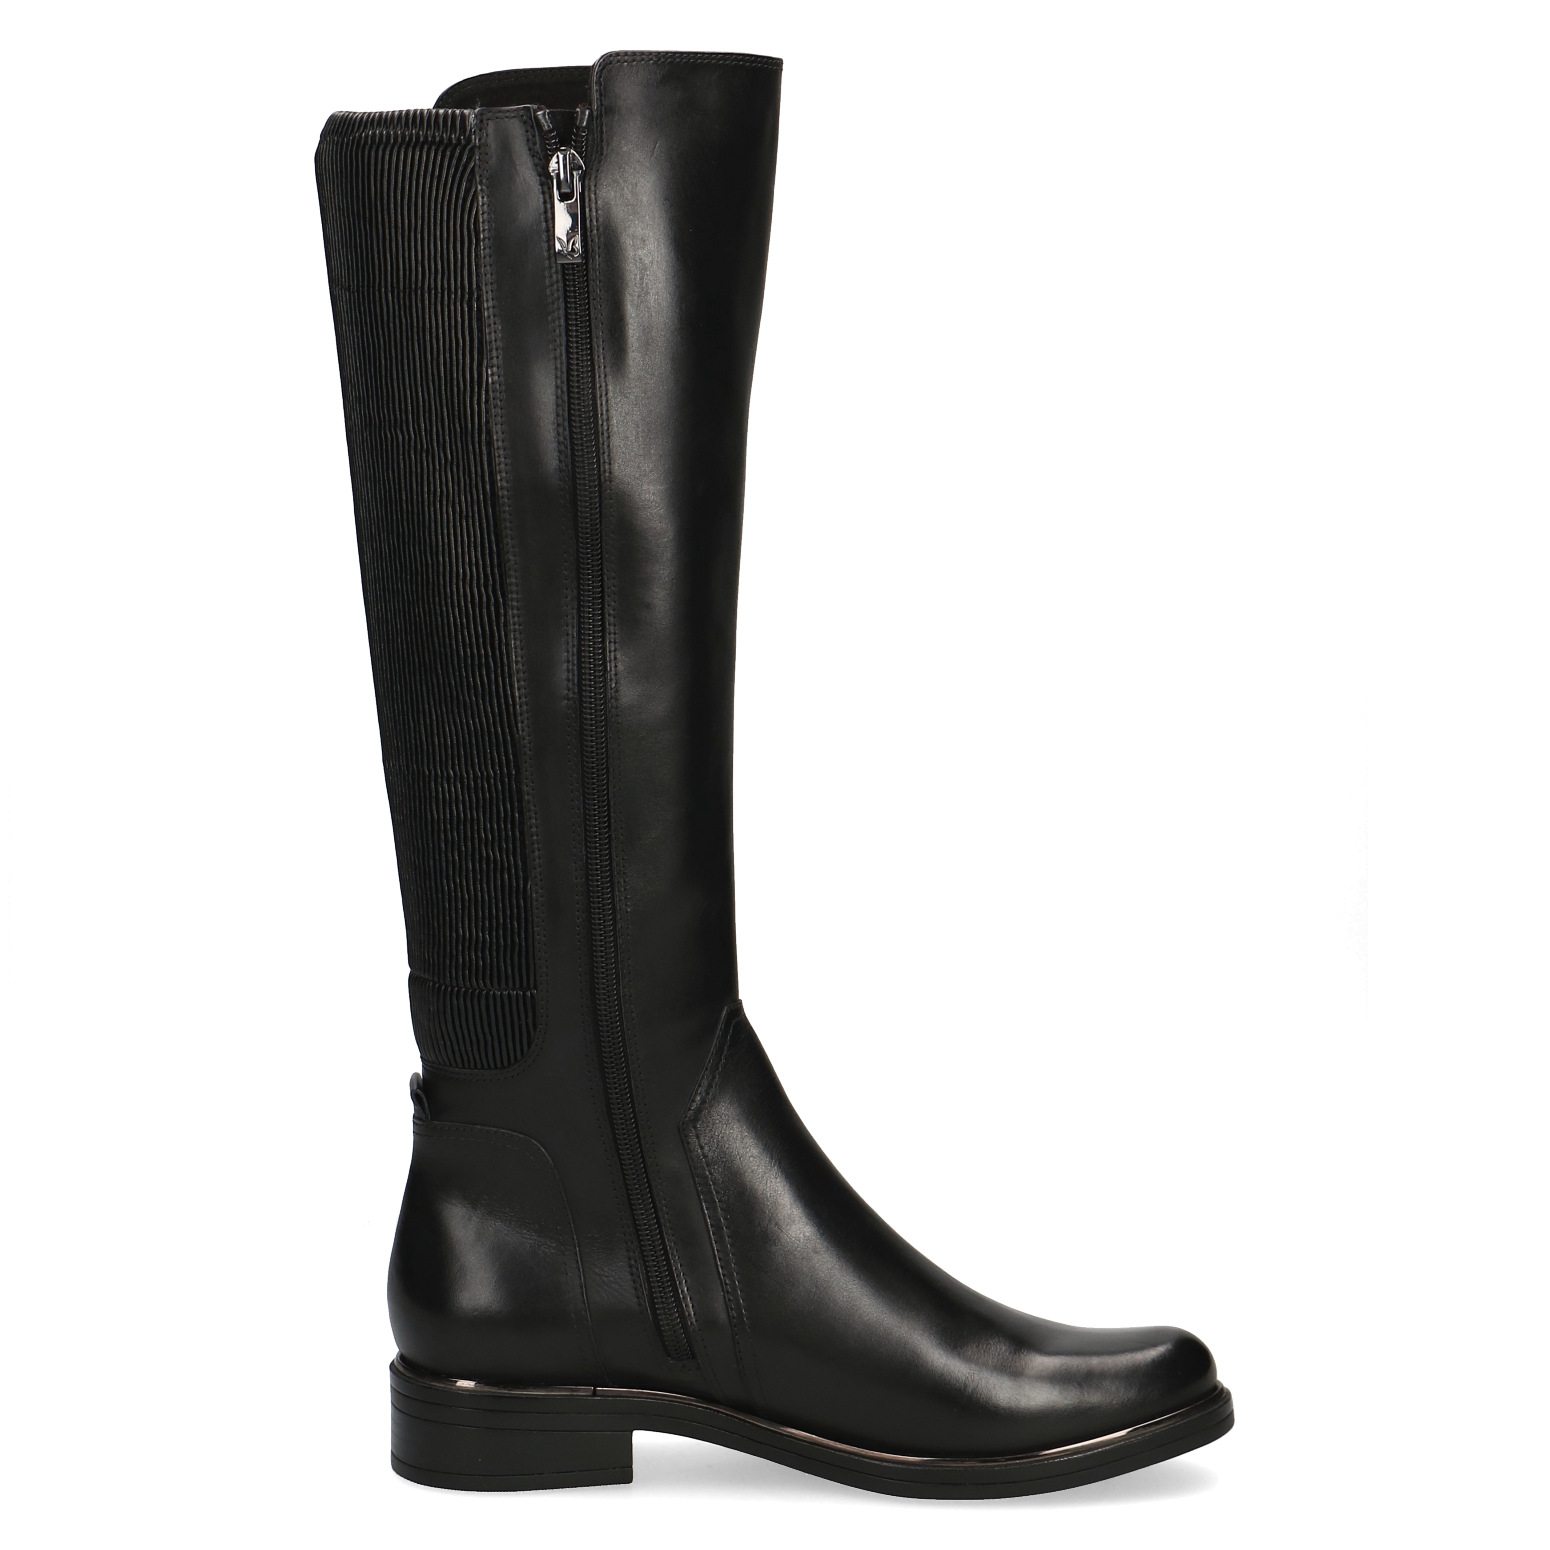 Caprice Stiefel - Black Leather/Synthetic